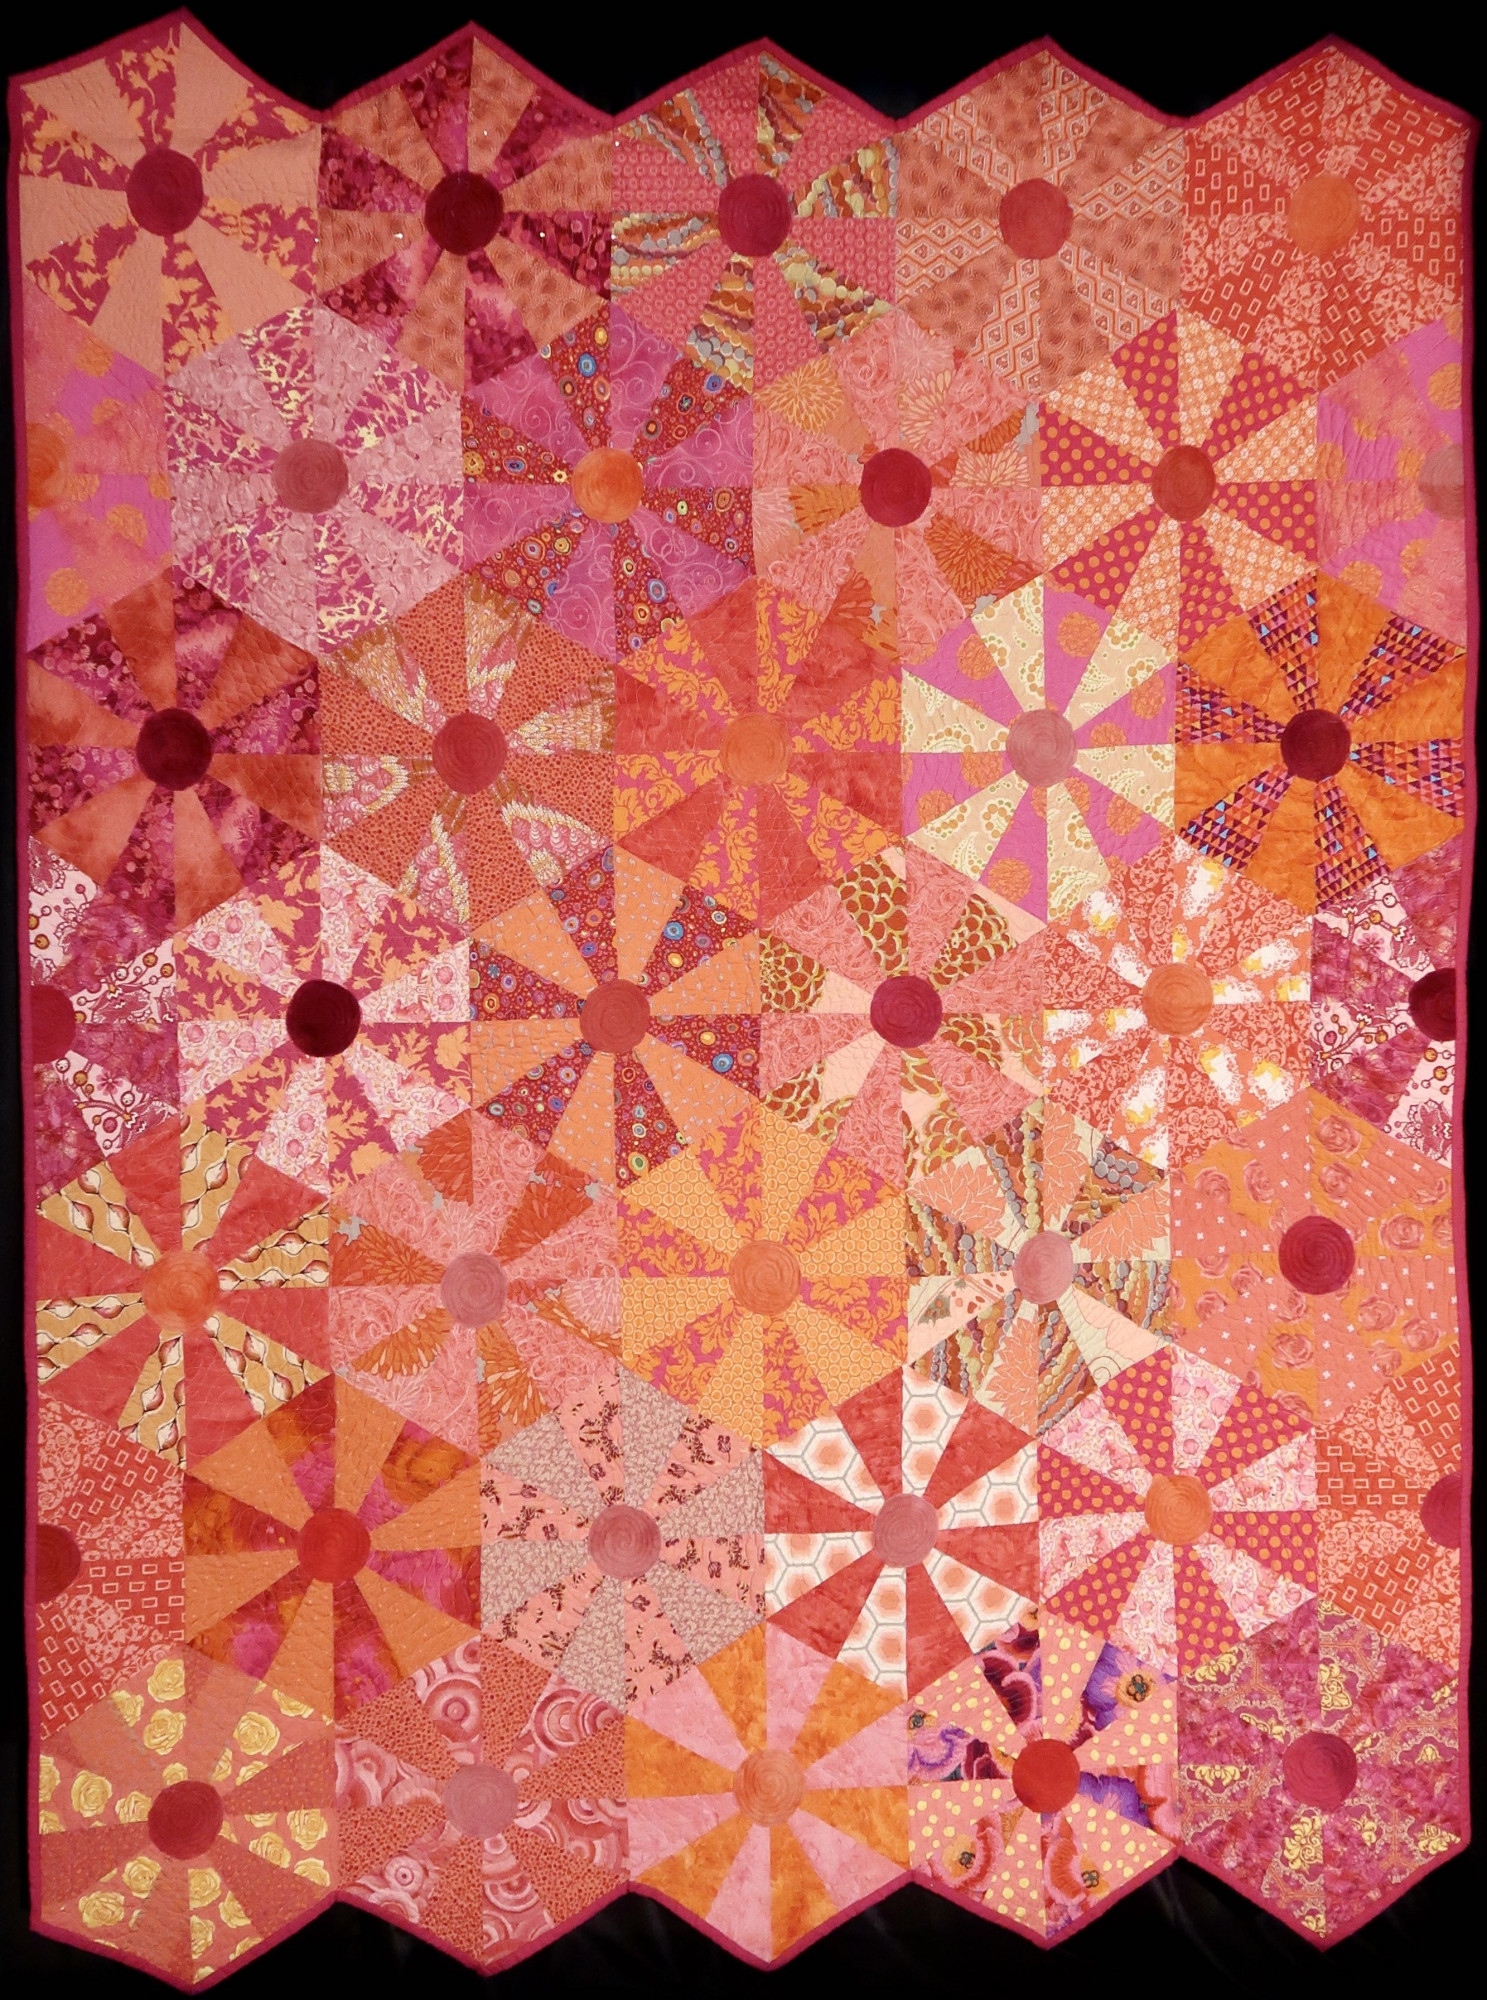 Blended Hexagons by Judy Gauthier